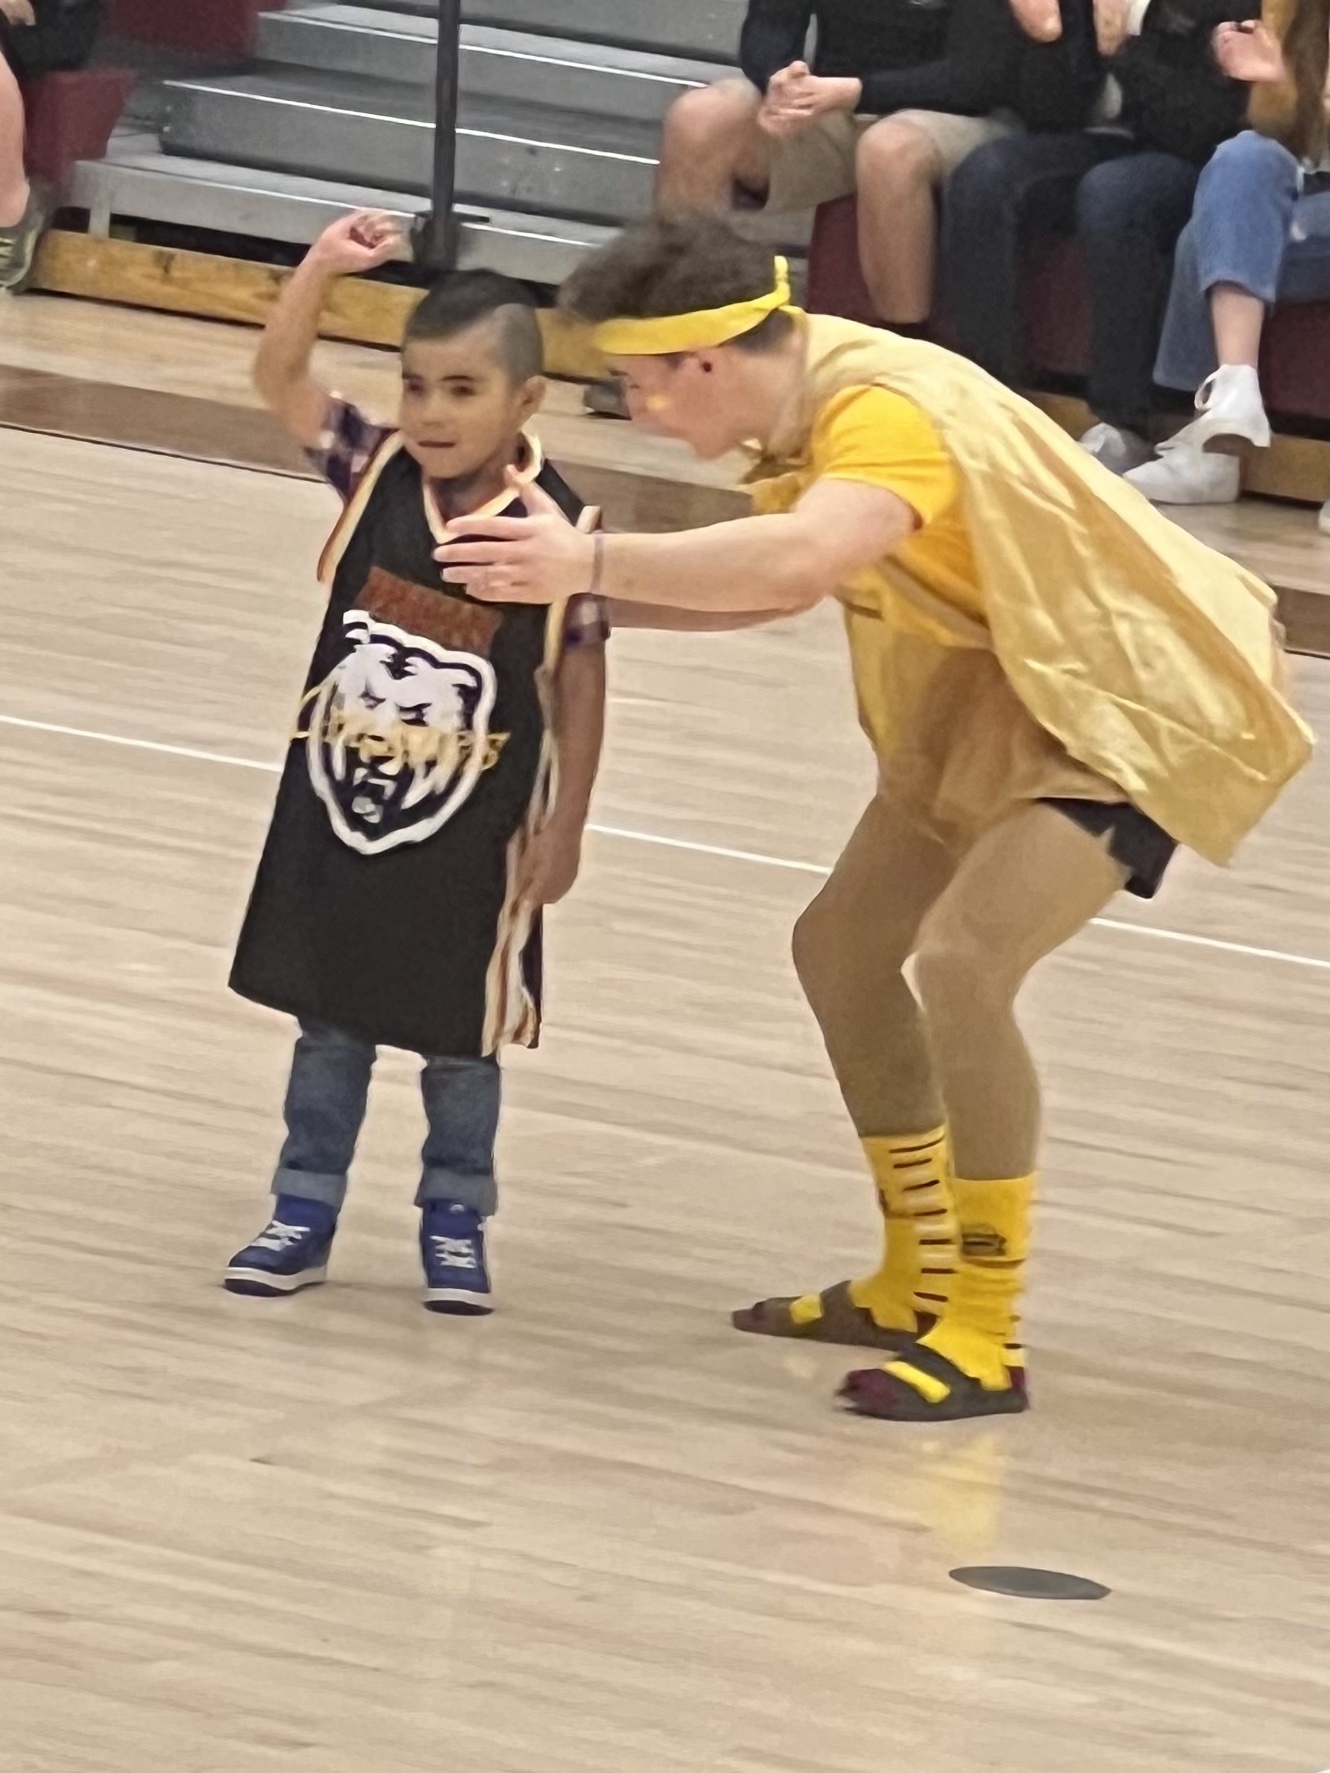 Ivan, Mountain Views Wish Week kid, selects the winner for the dance completion during the assembly on Thursday. Wish week is a moving tradition at Mountain View where the school bands together to support a child with a critical illness in receiving a wish.